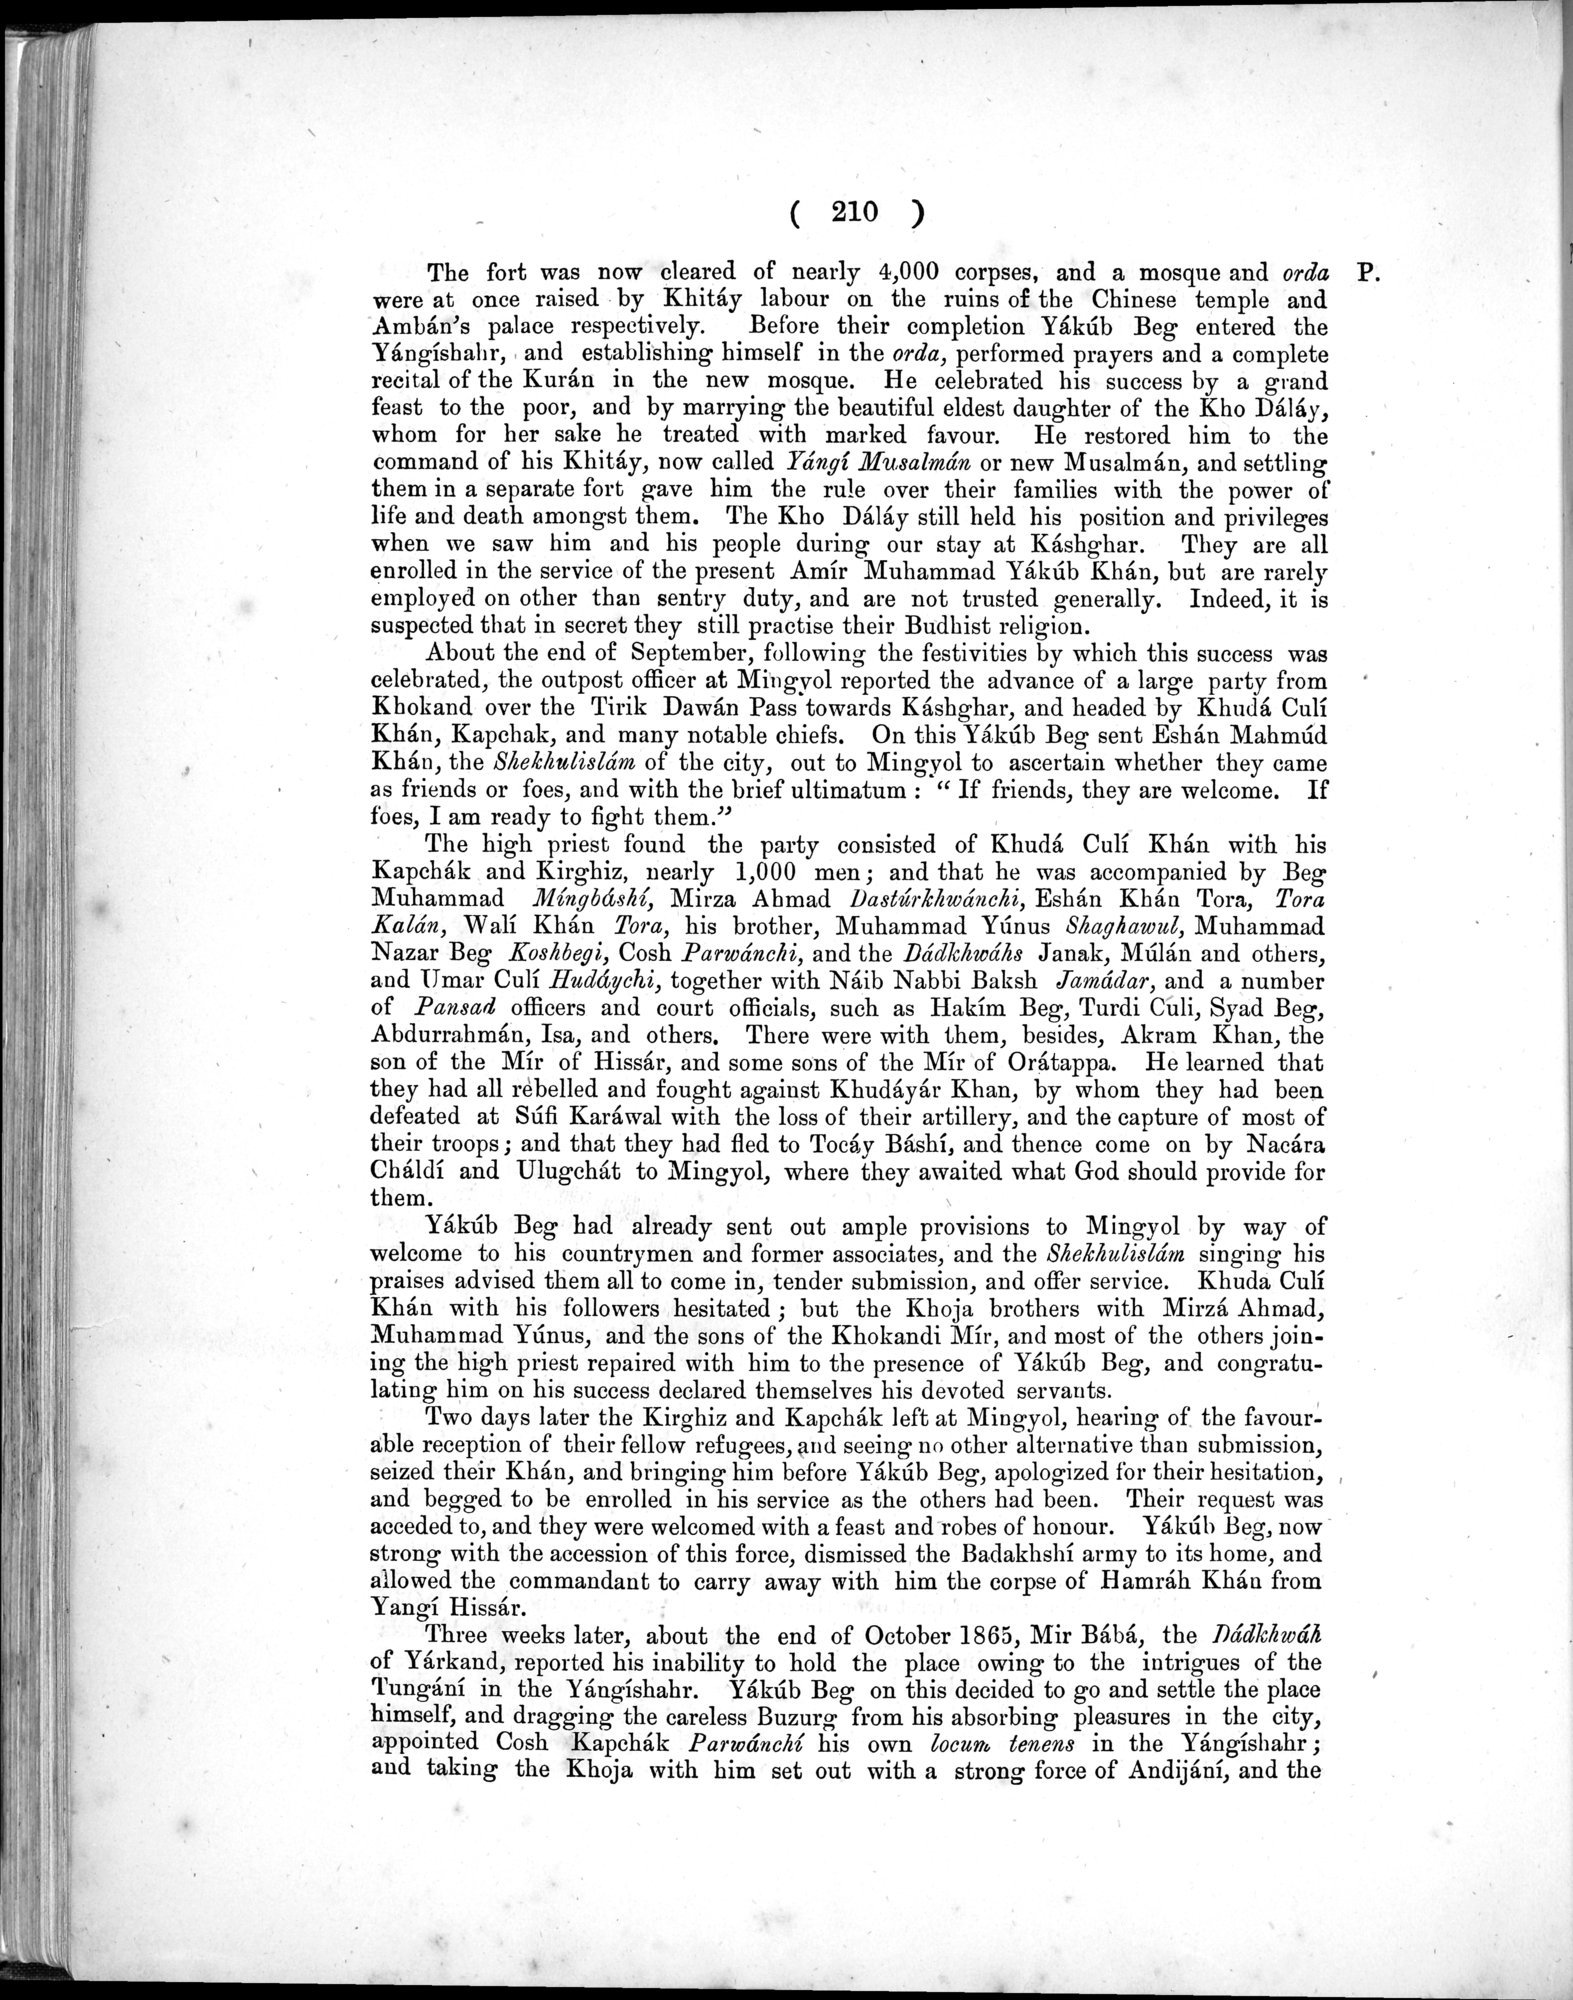 Report of a Mission to Yarkund in 1873 : vol.1 / Page 302 (Grayscale High Resolution Image)